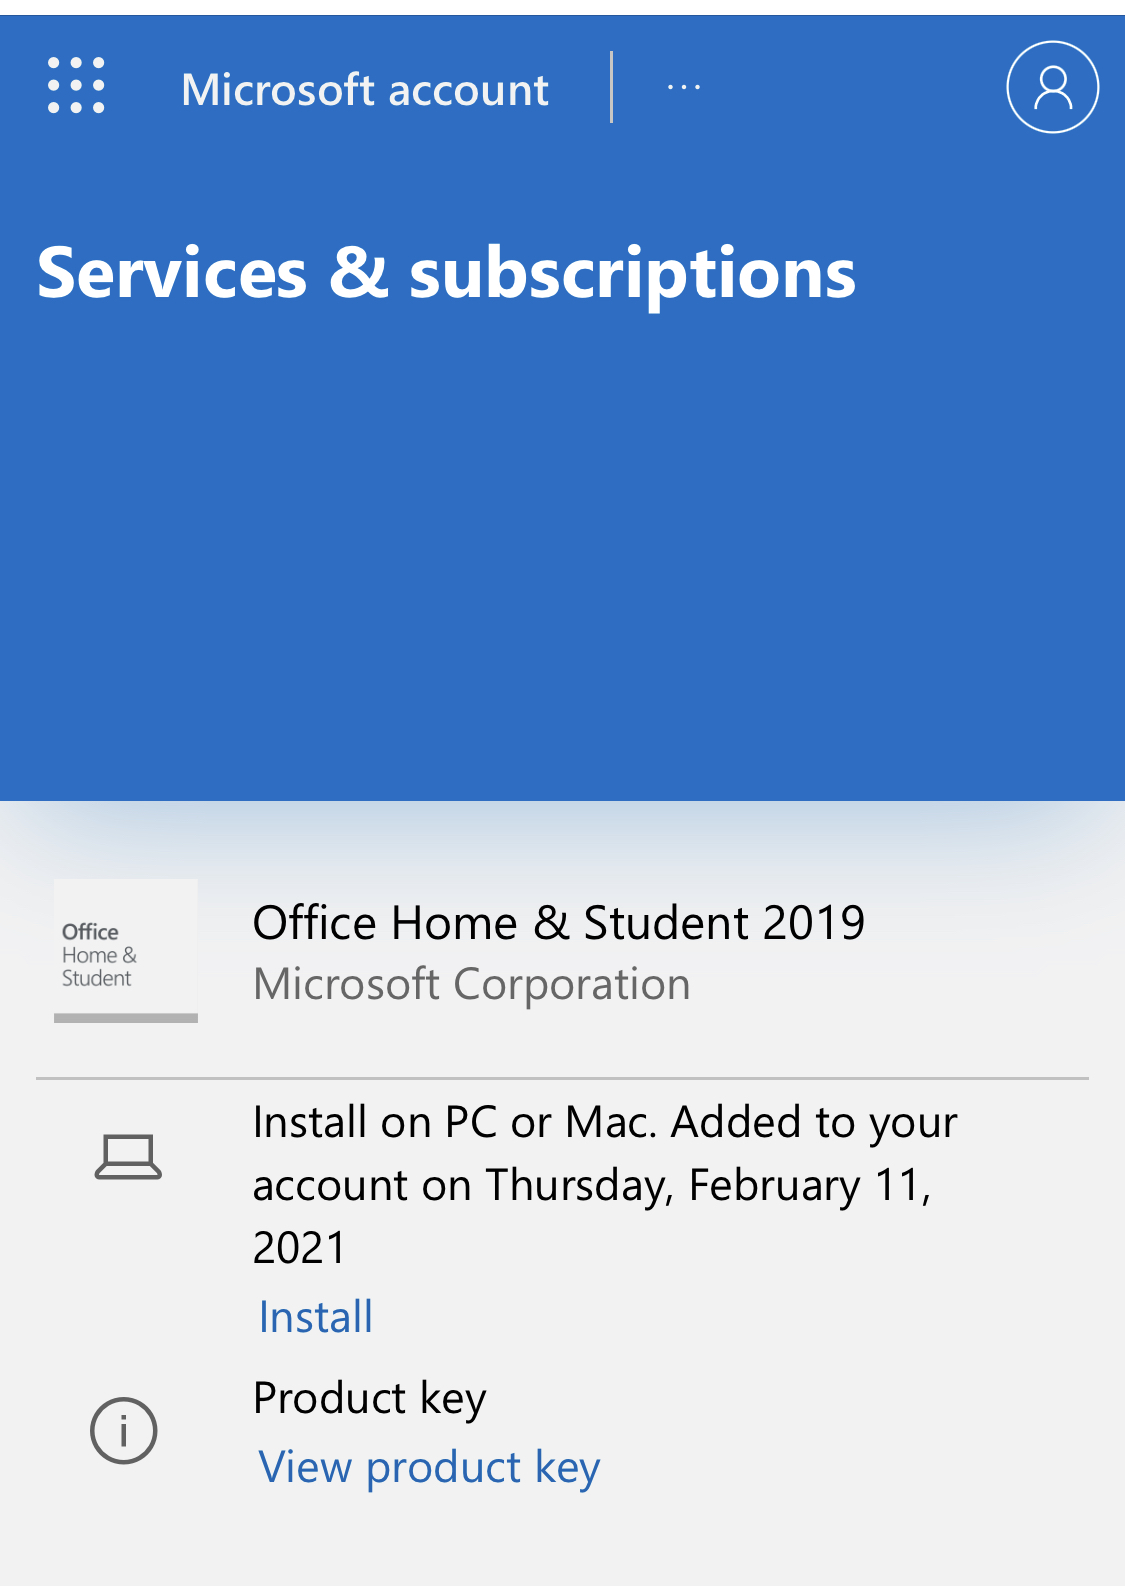 Found Microsoft Home Community 2019 & License No for Student for Office Mac -